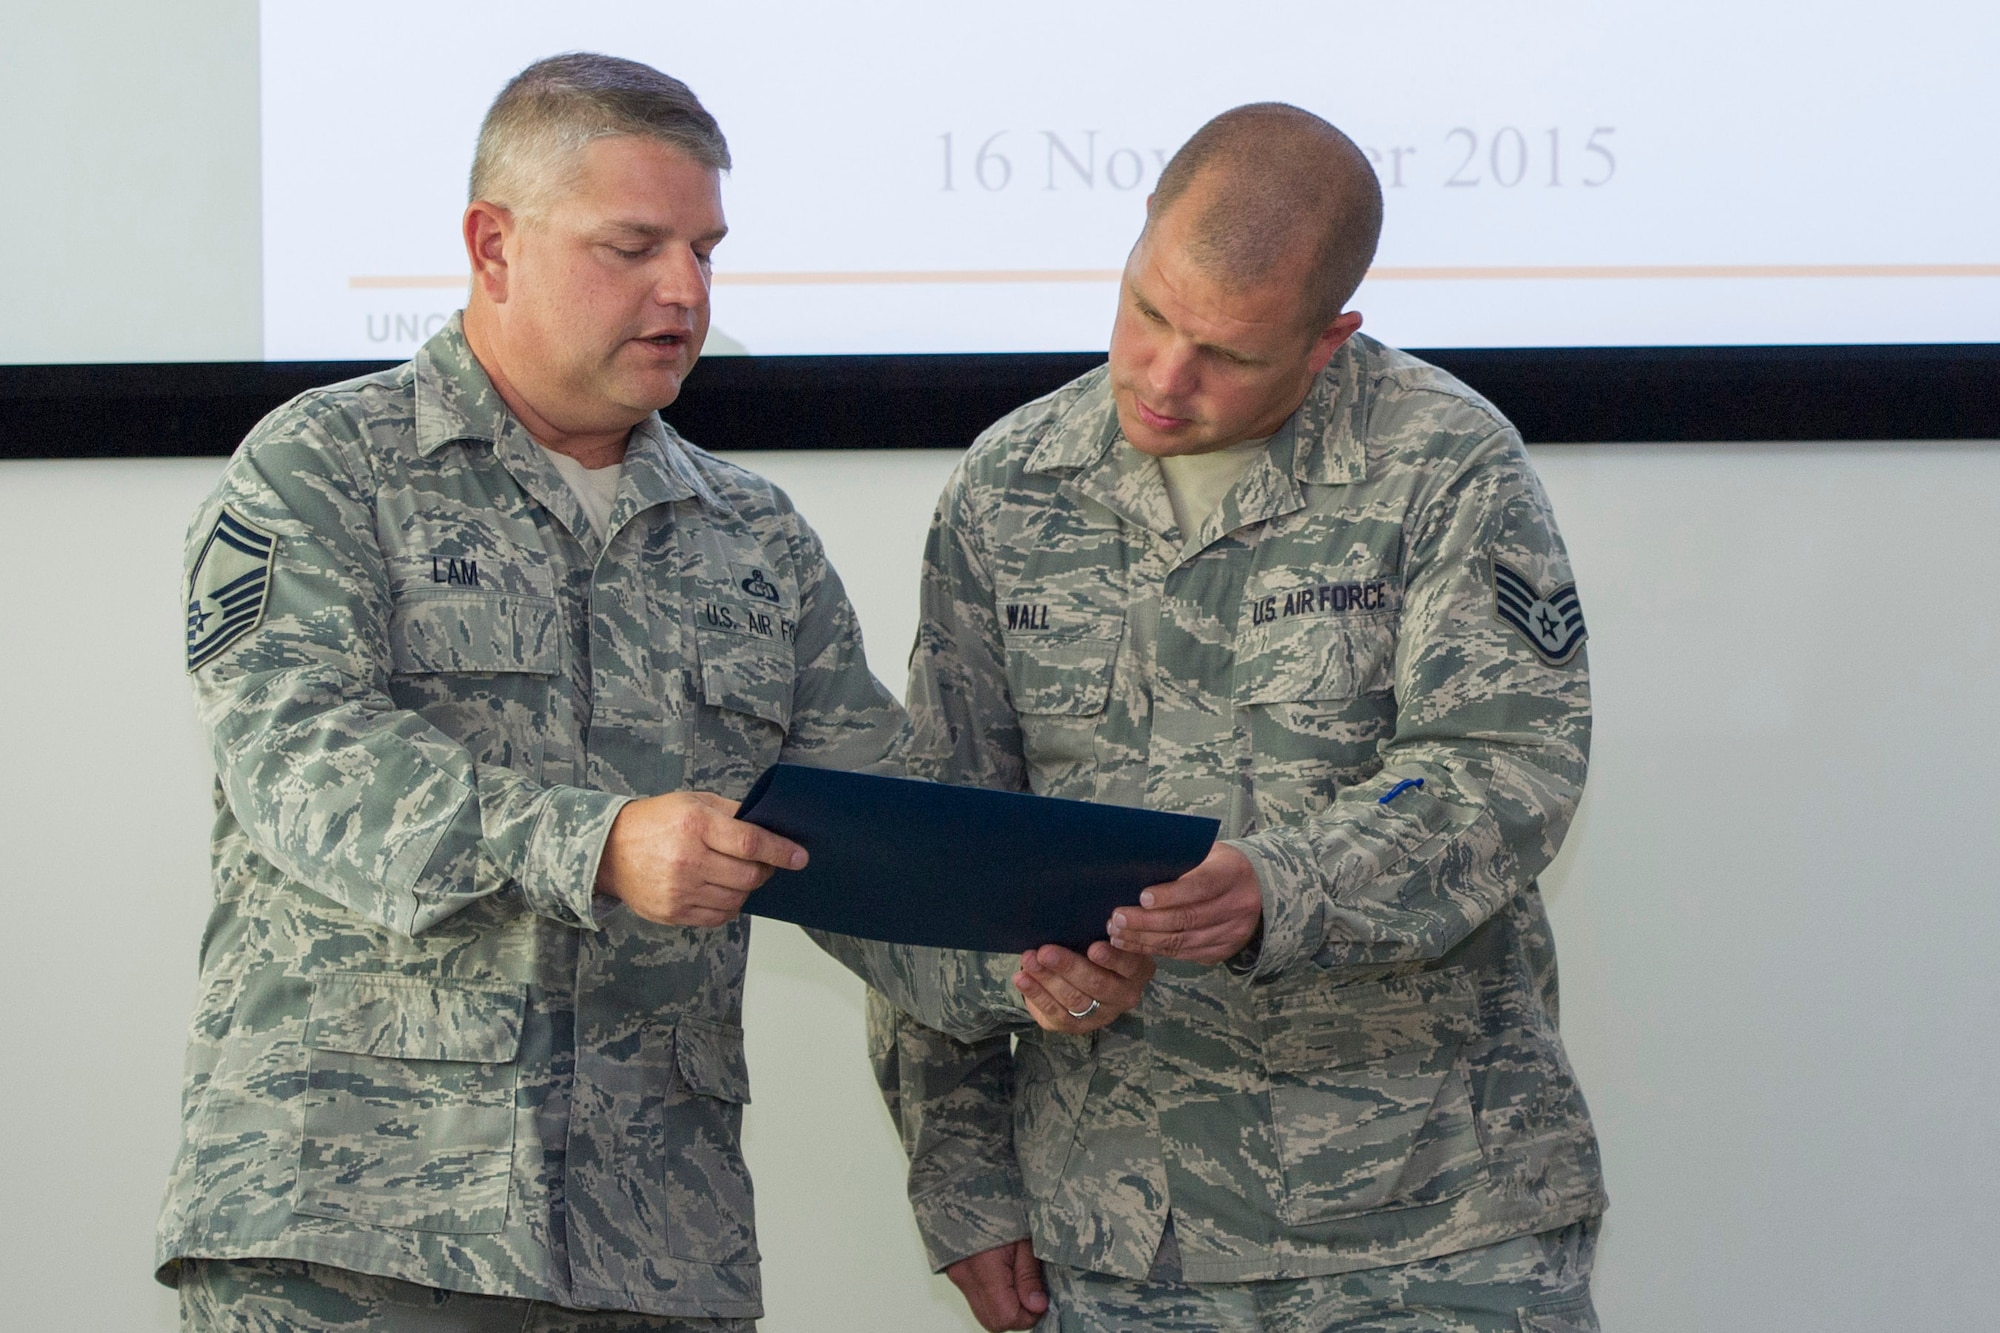 Senior Master Sgt. Gary Lam, 45th Weather Squadron superintendent and Space Coast Top-3 Association president, presents Staff Sgt. Clint Wall, 45th Launch Support Squadron unit training manager, with a superior performer award for the month of August, at Patrick Air Force Base, Fla., Nov. 16, 2015. The sergeant was recognized for exemplary duty performance, self-improvement initiatives and community involvement. Additionally, the sergeant was coined and given a one-night complementary stay at a hotel in Cocoa Beach, Fla. (U.S. Air Force photo/Matthew Jurgens/Released)